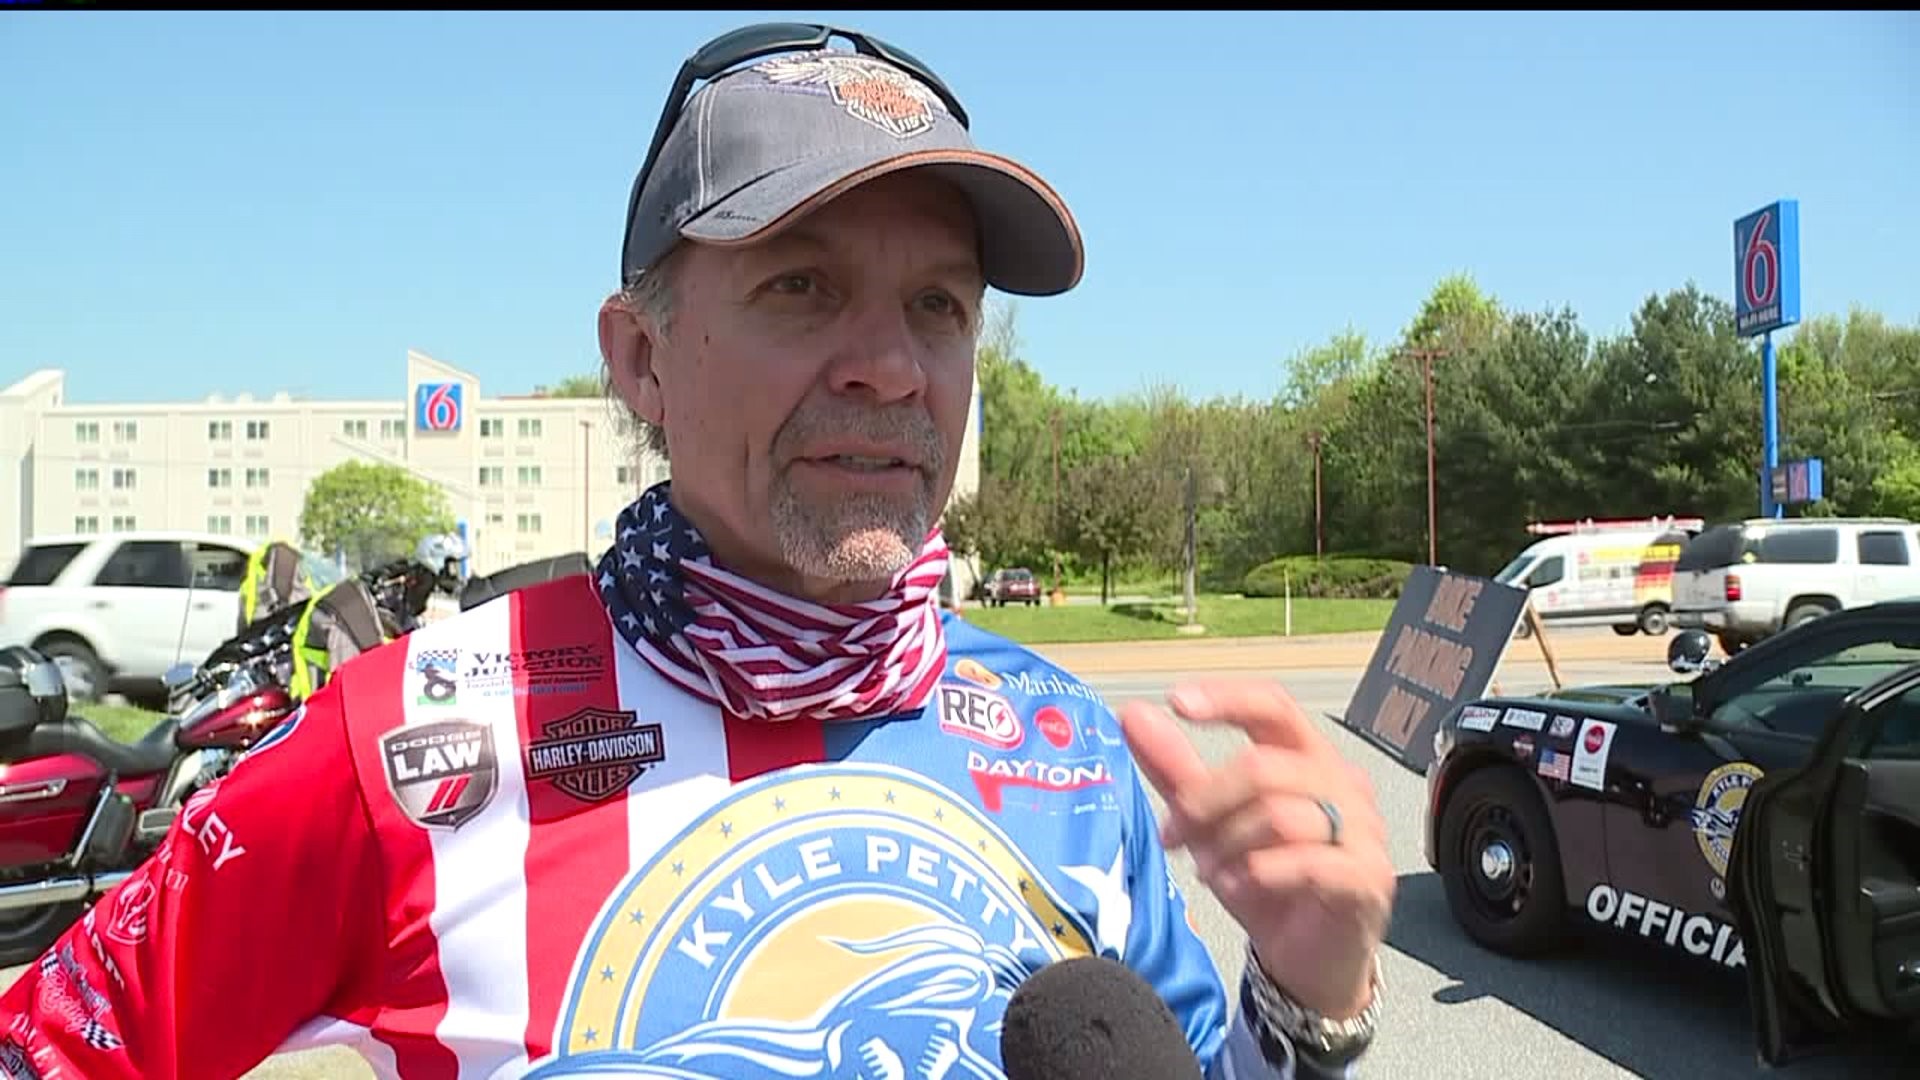 Kyle Petty Charity Ride makes stops in Central PA